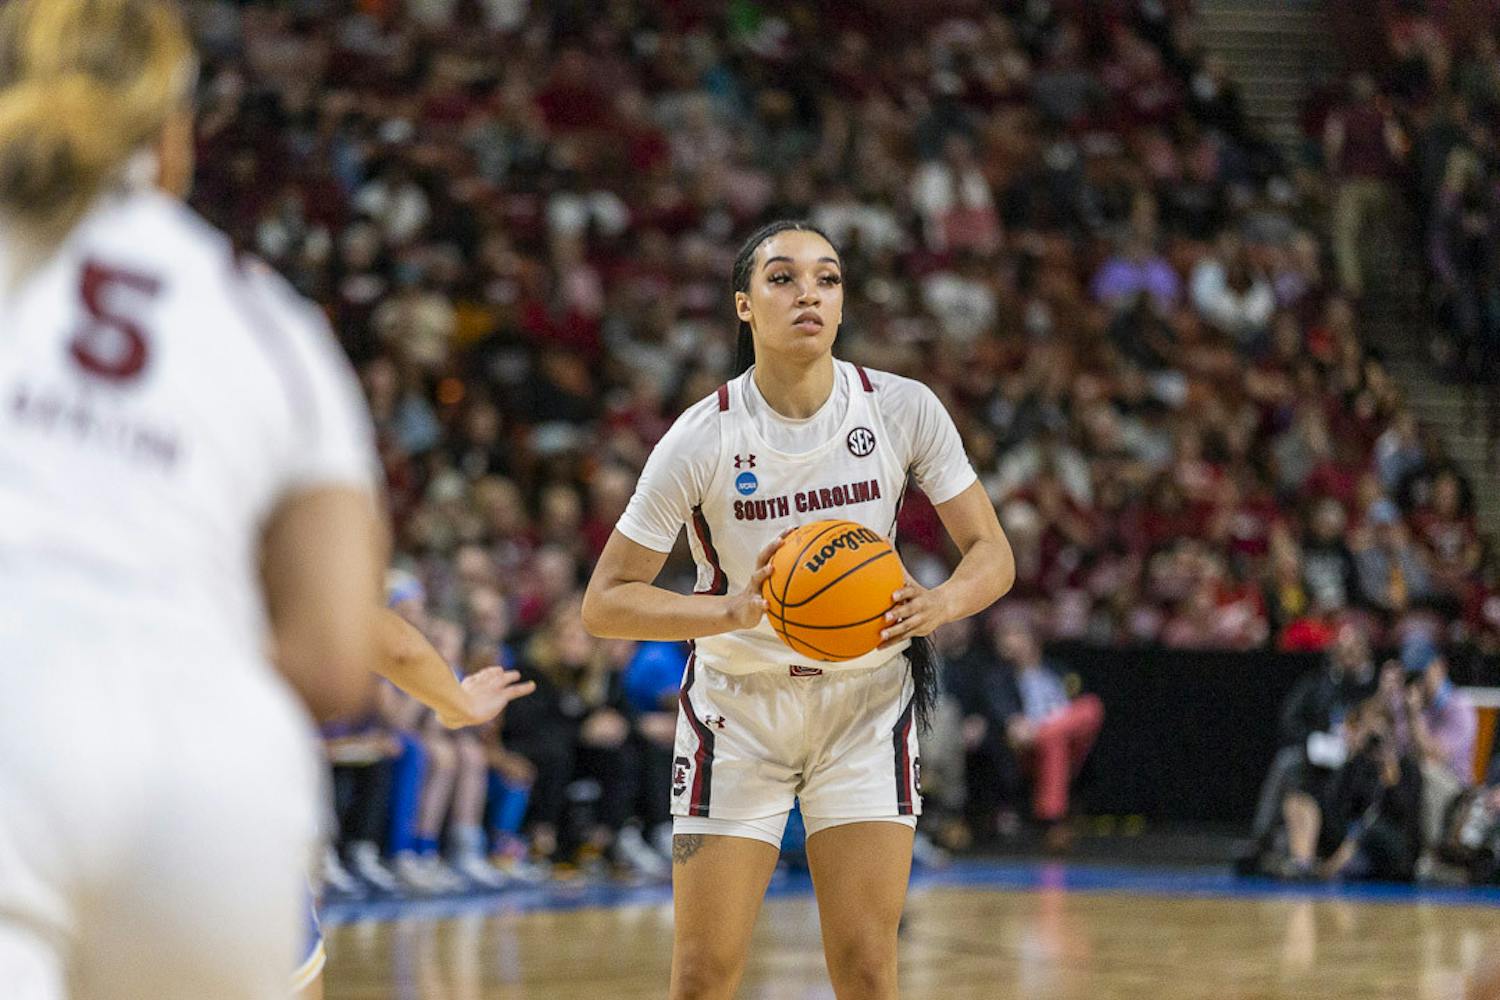 Senior guard Brea Beal looks for a teammate to pass the ball to during the matchup between South Carolina and UCLA on March 25, 2023. The Gamecocks beat the Bruins 59-43 and will move on to the Elite Eight tournament on March 27, 2023, against the University of Maryland.